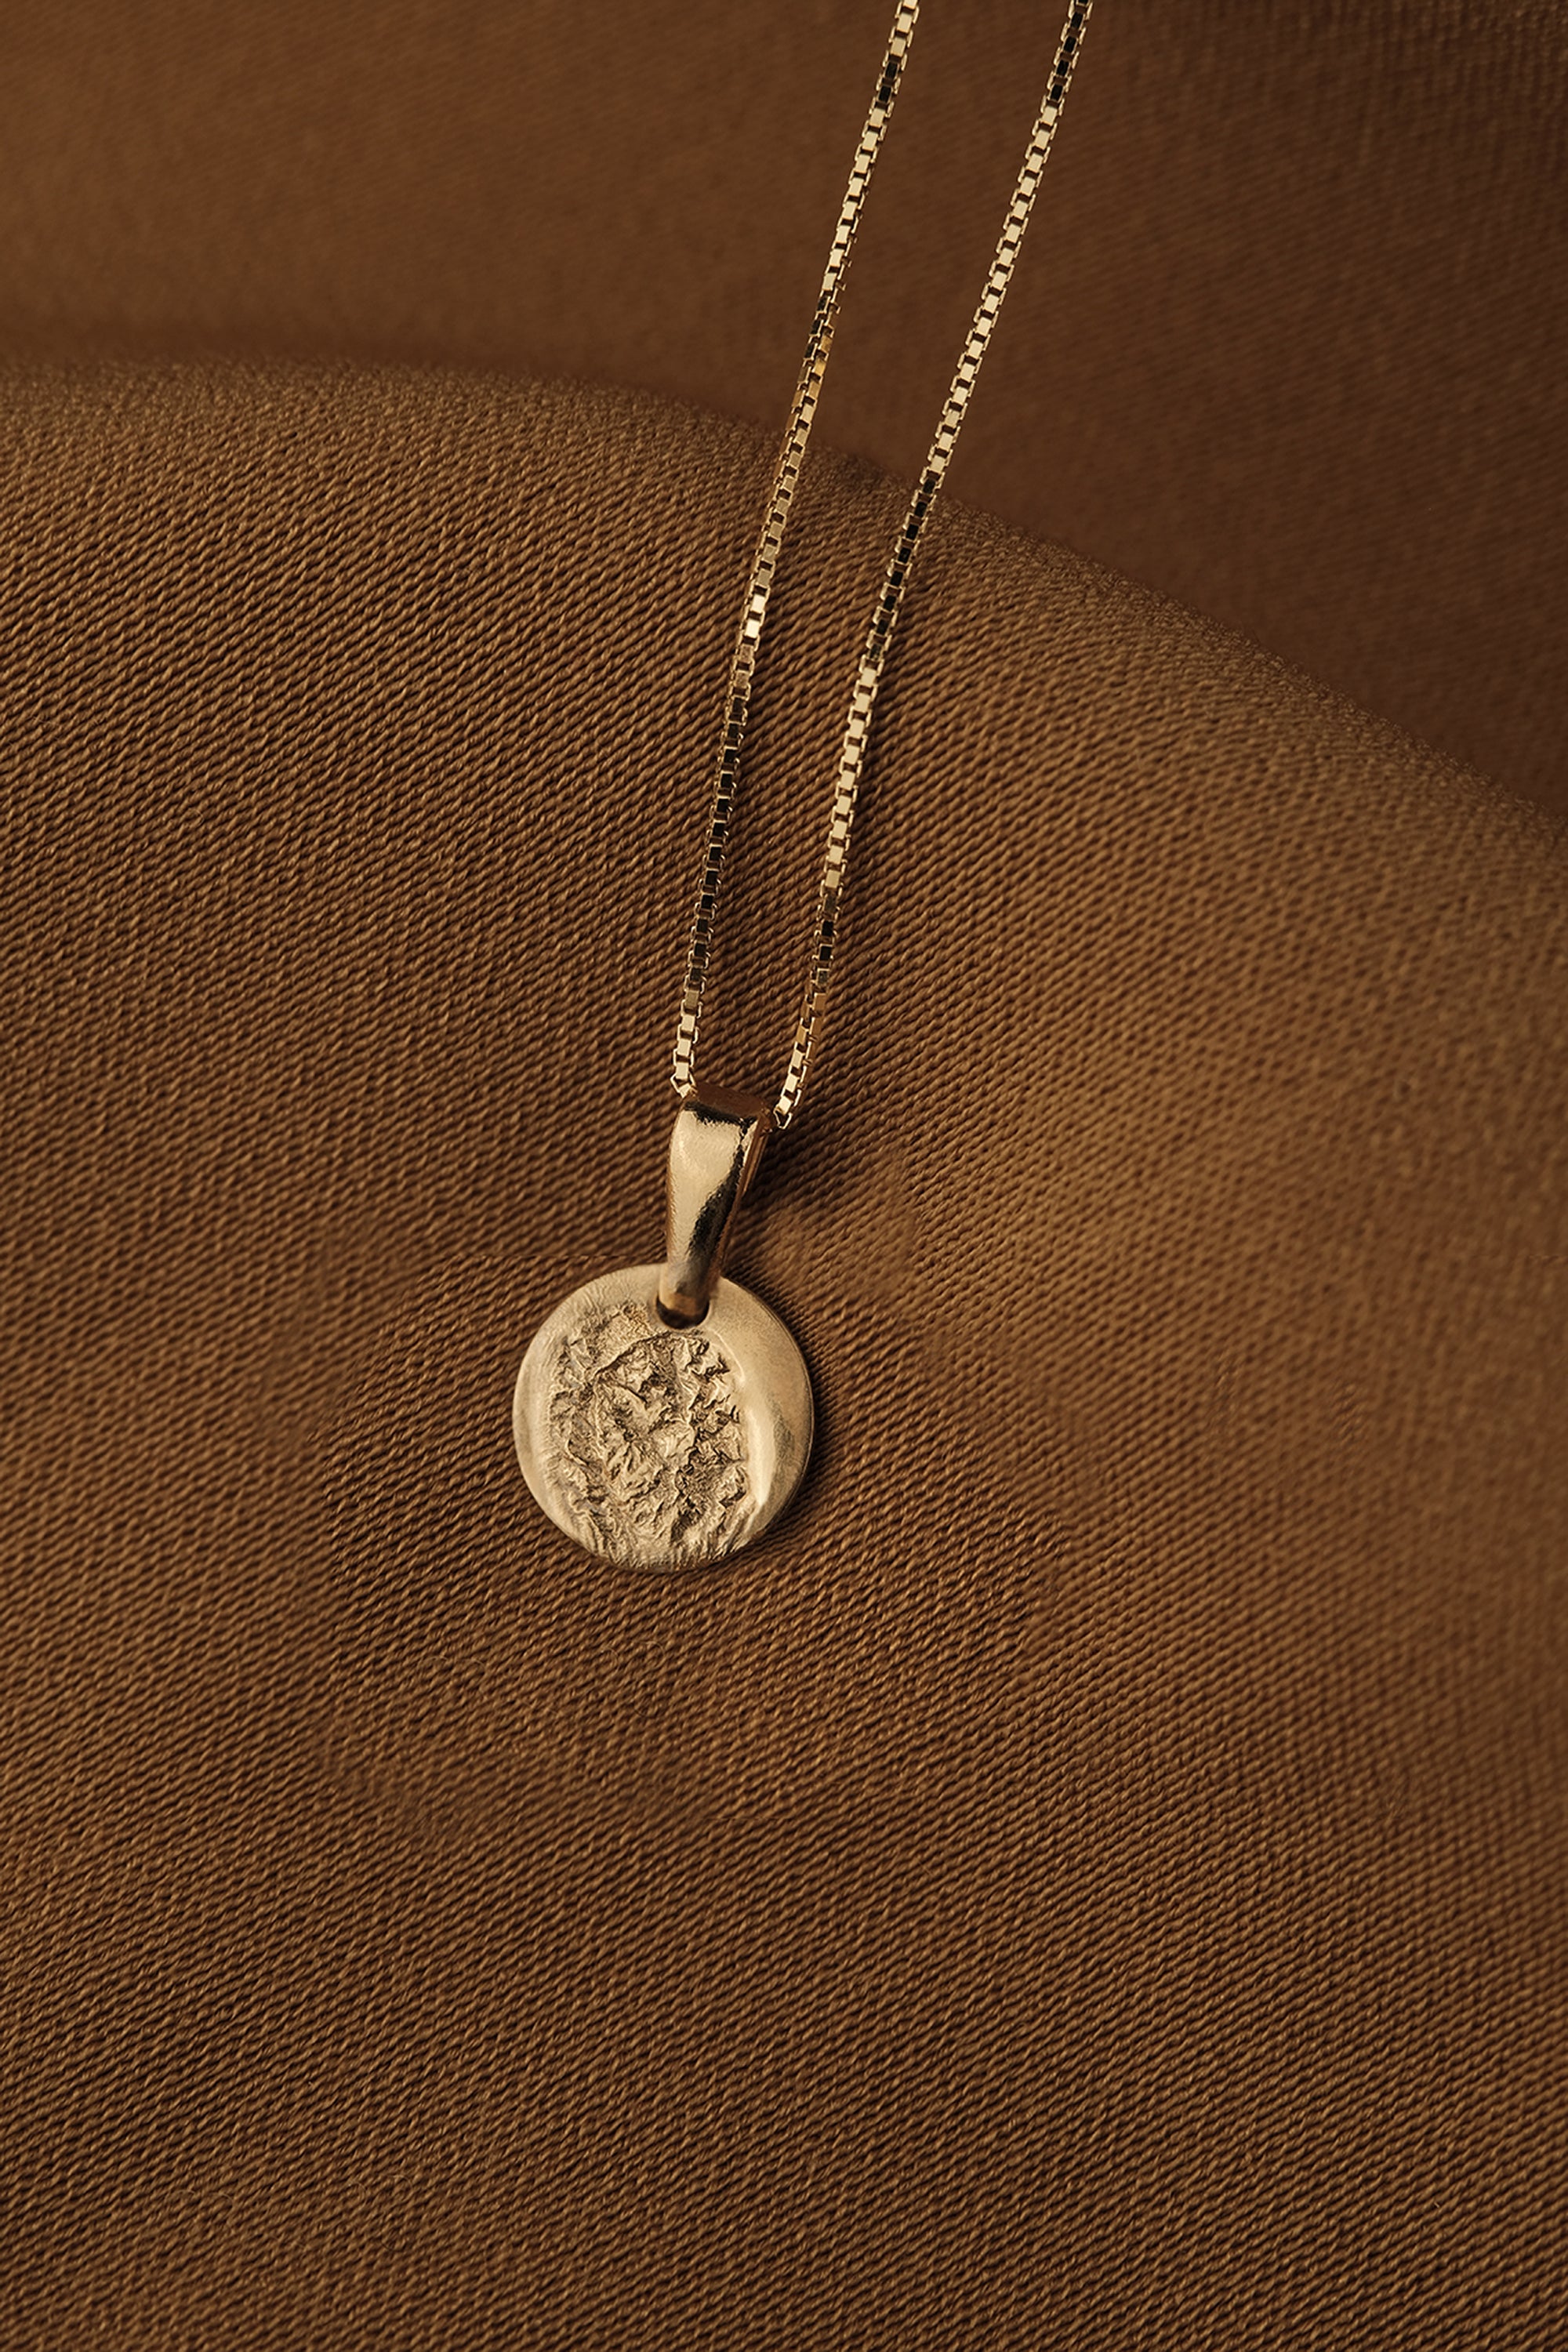 ROUND CHARM necklace N°1 (S)